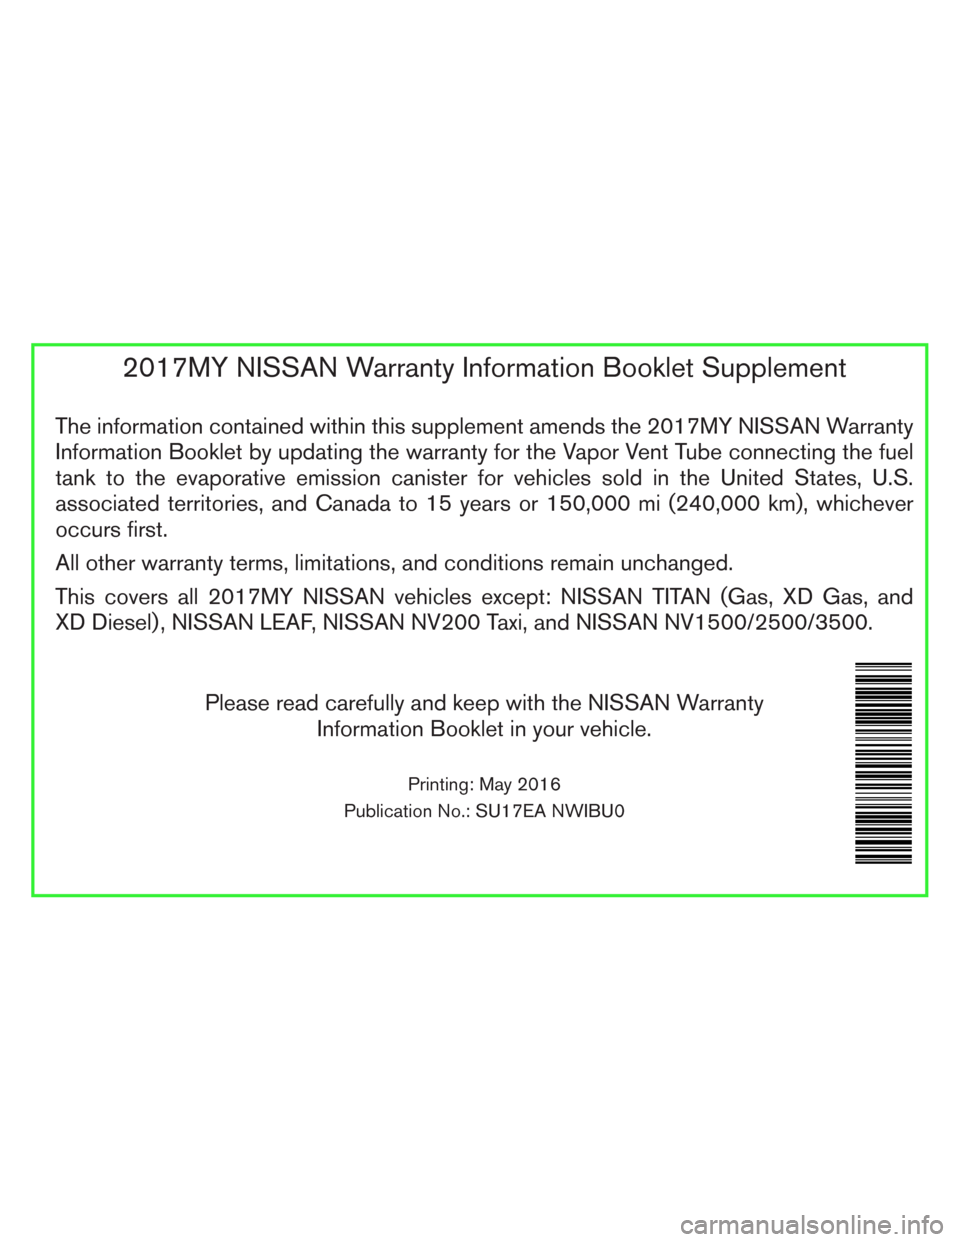 NISSAN SENTRA 2017 B17 / 7.G Warranty Booklet 2017MY NISSAN Warranty Information Booklet Supplement
The information contained within this supplement amends the 2017MY NISSAN Warranty
Information Booklet by updating the warranty for the Vapor Vent